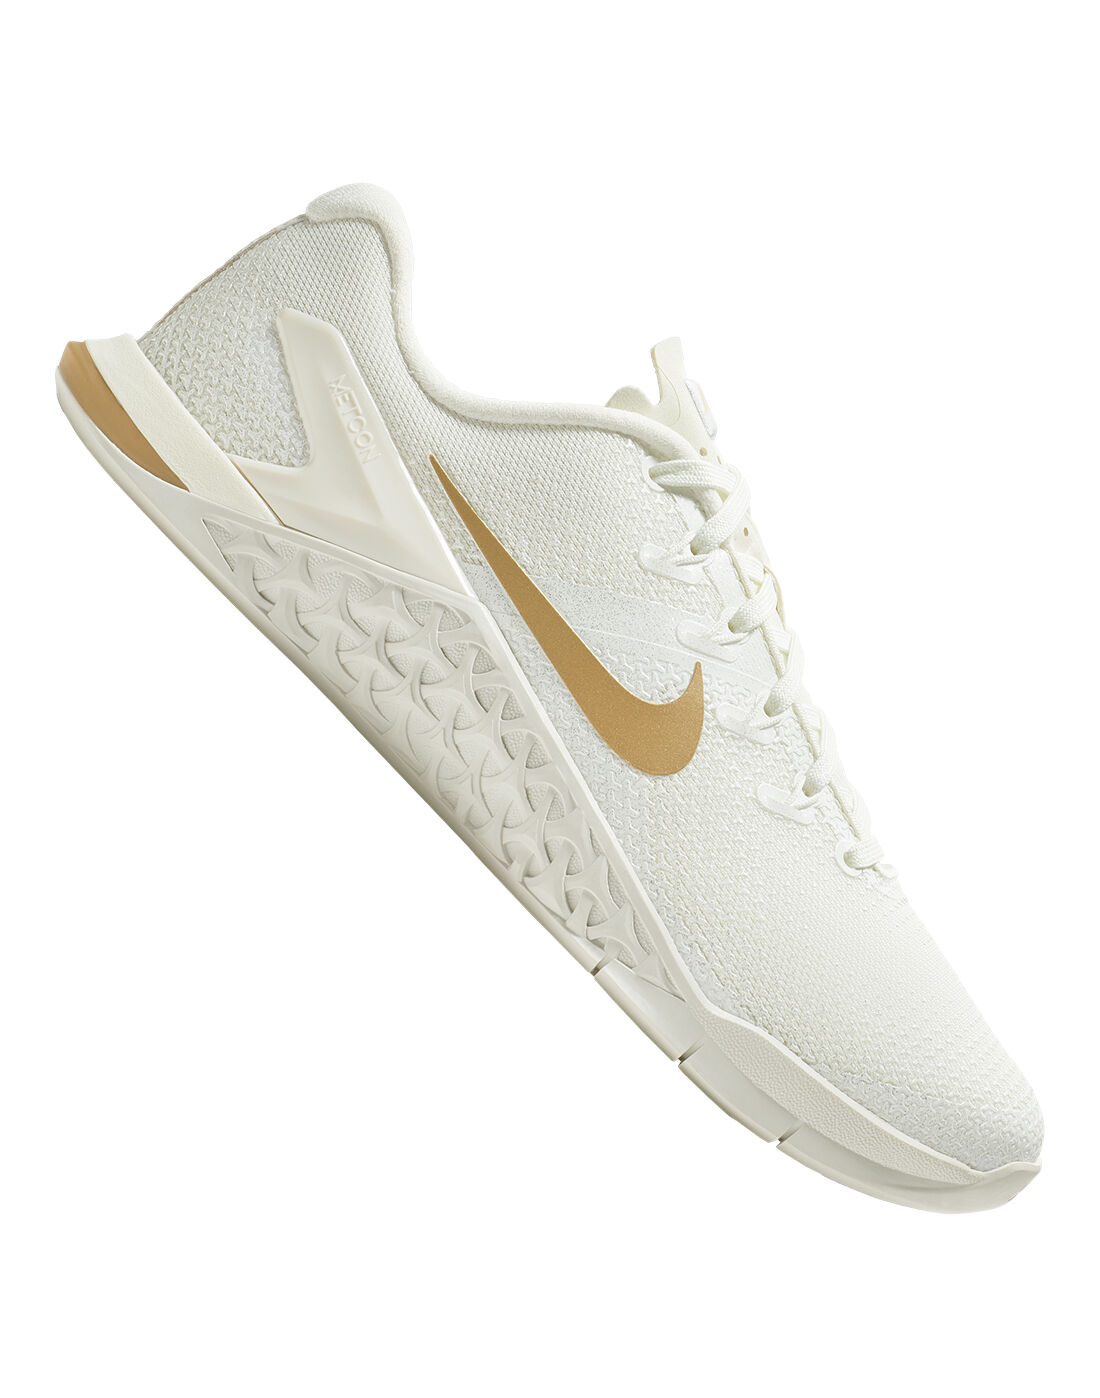 Gold Nike Metcon Gym Shoes 